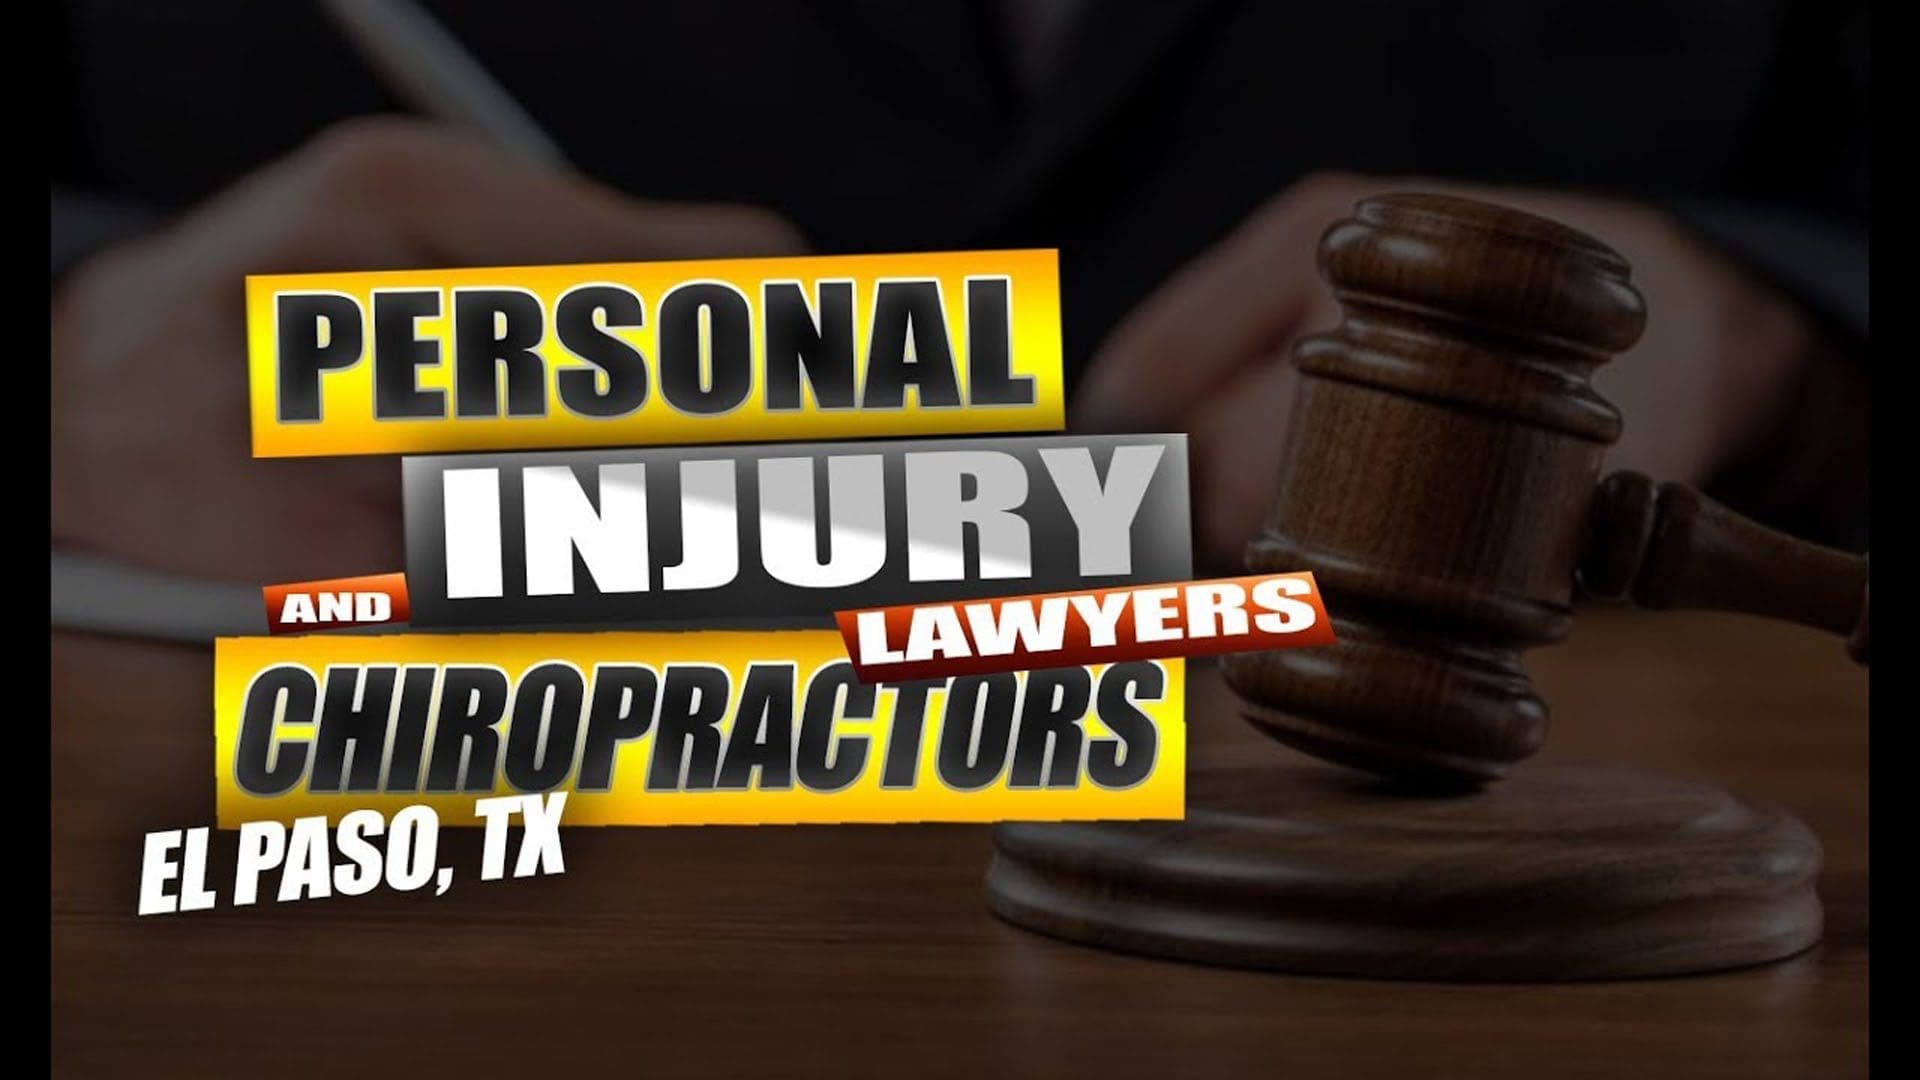 personal injury lawyers and chiropractors el paso tx.